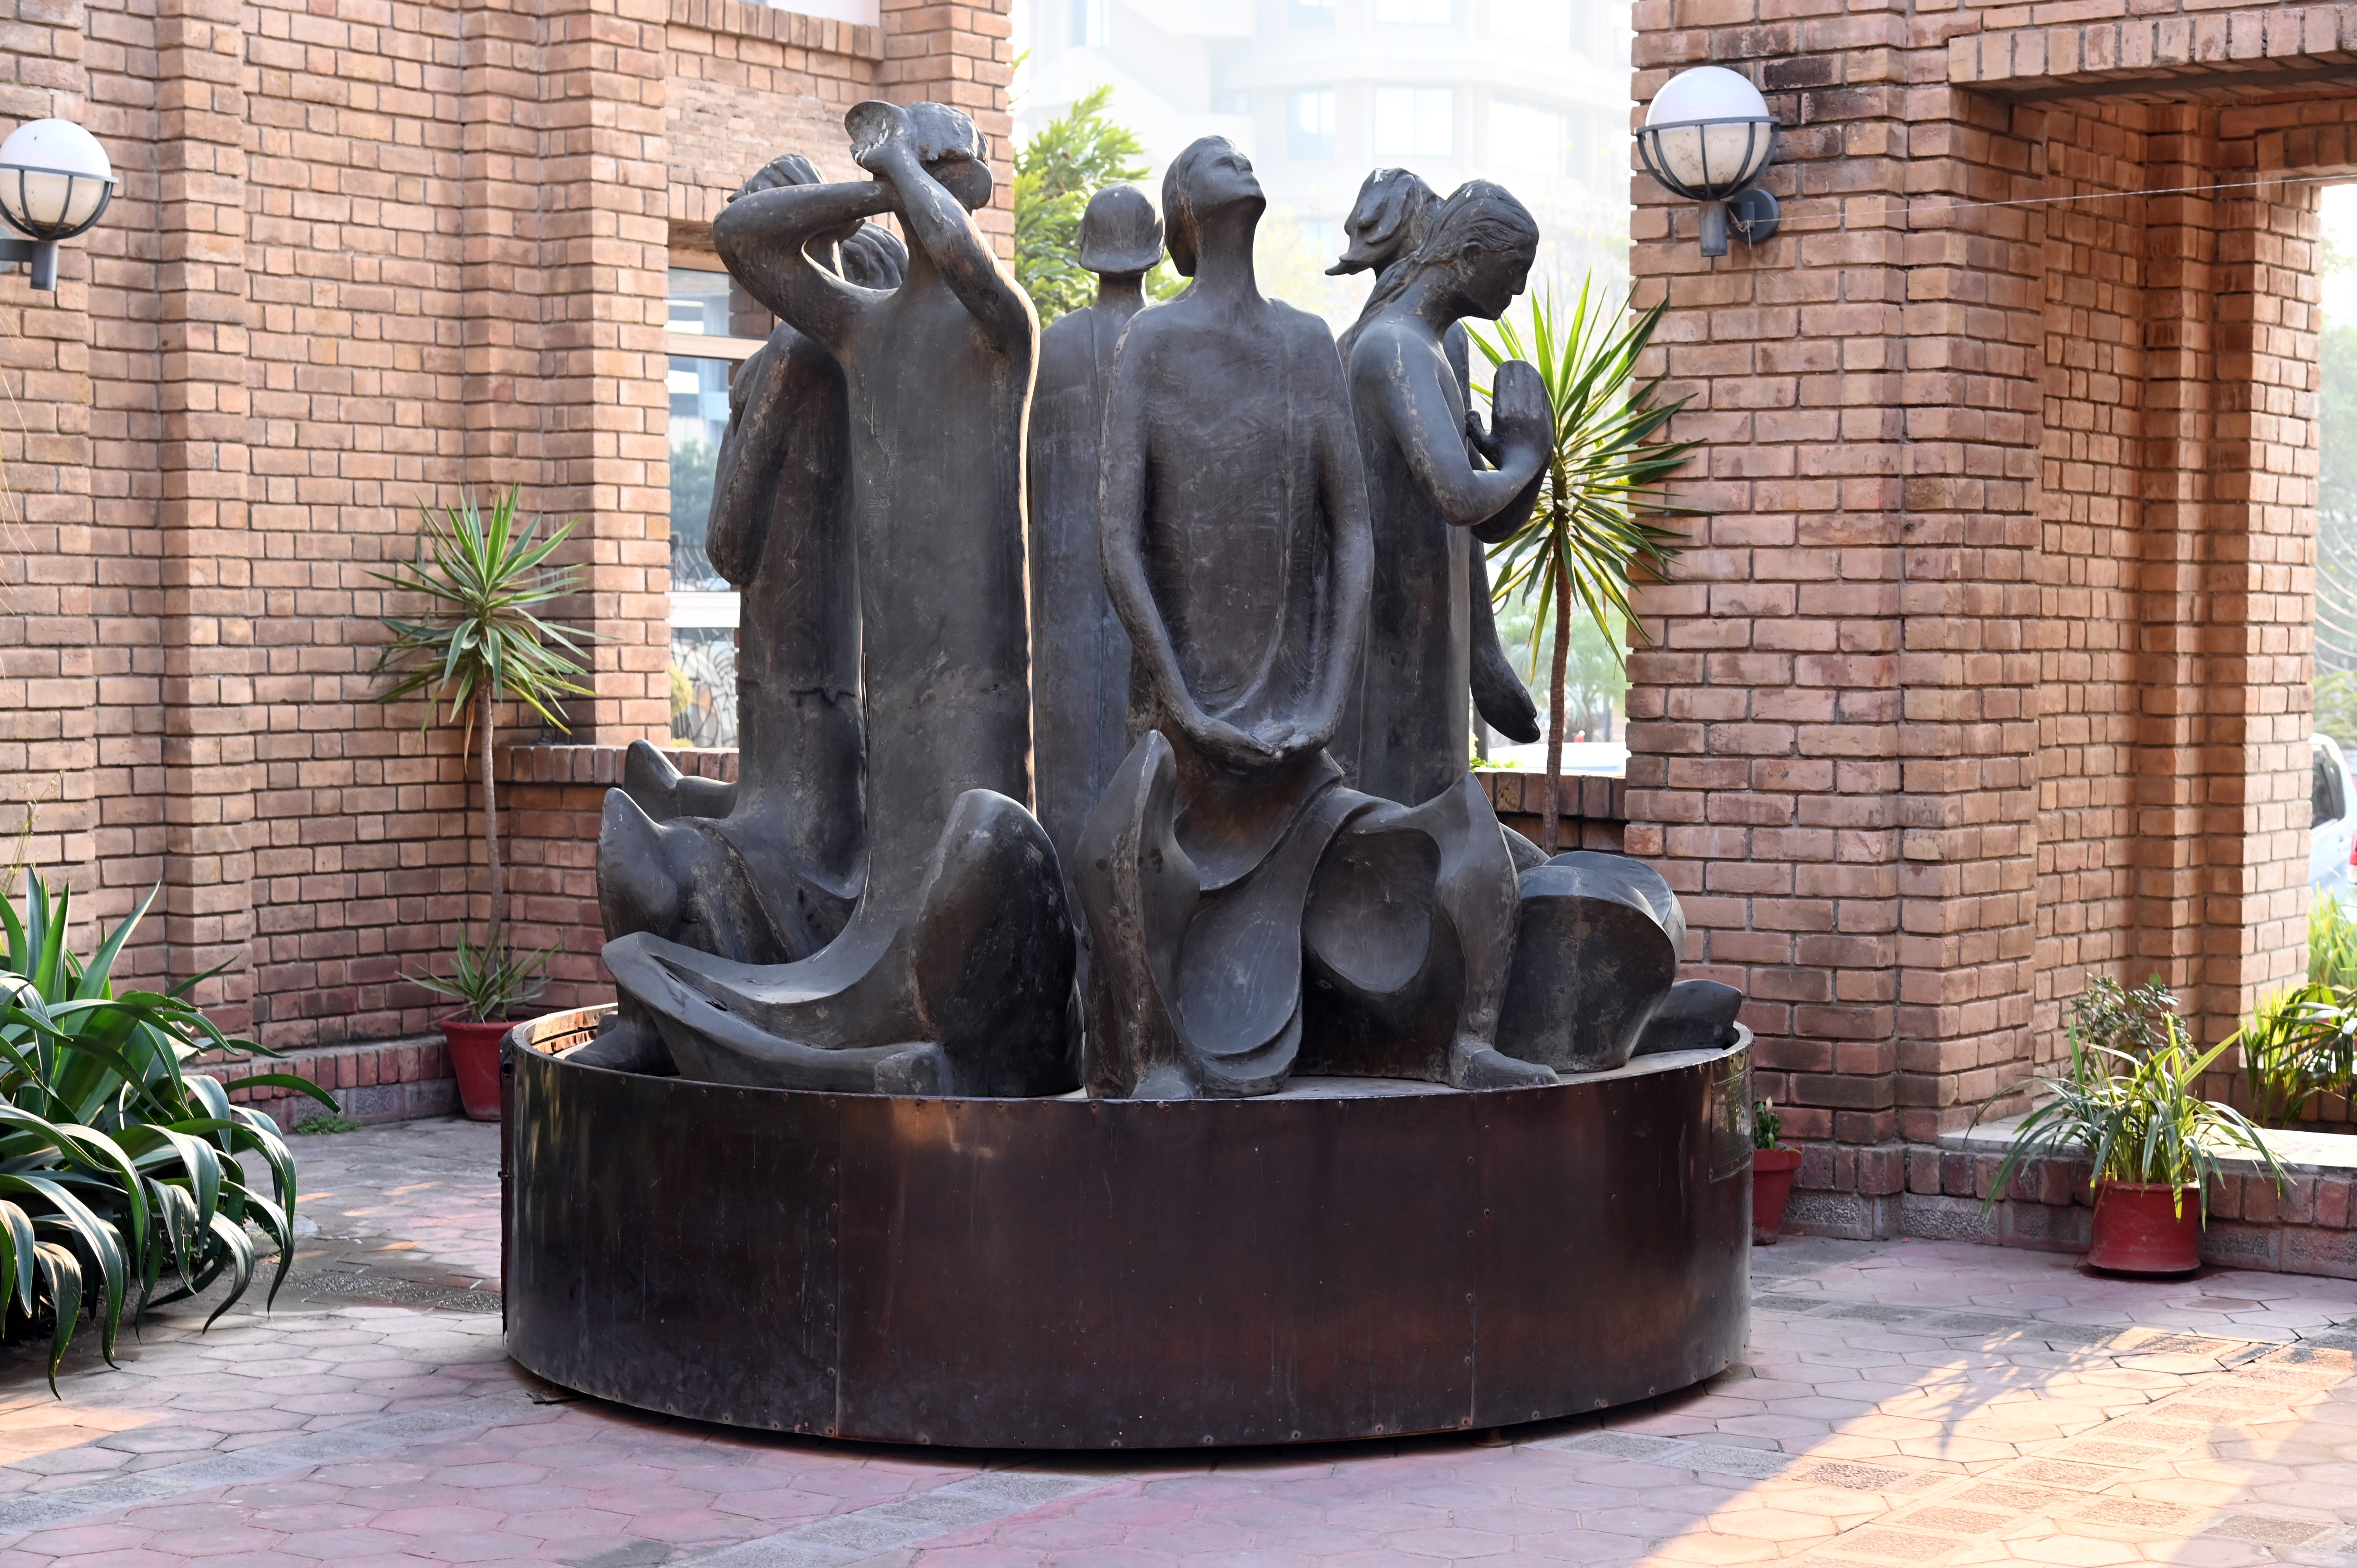 The Contemporary sculptures outside PNCA